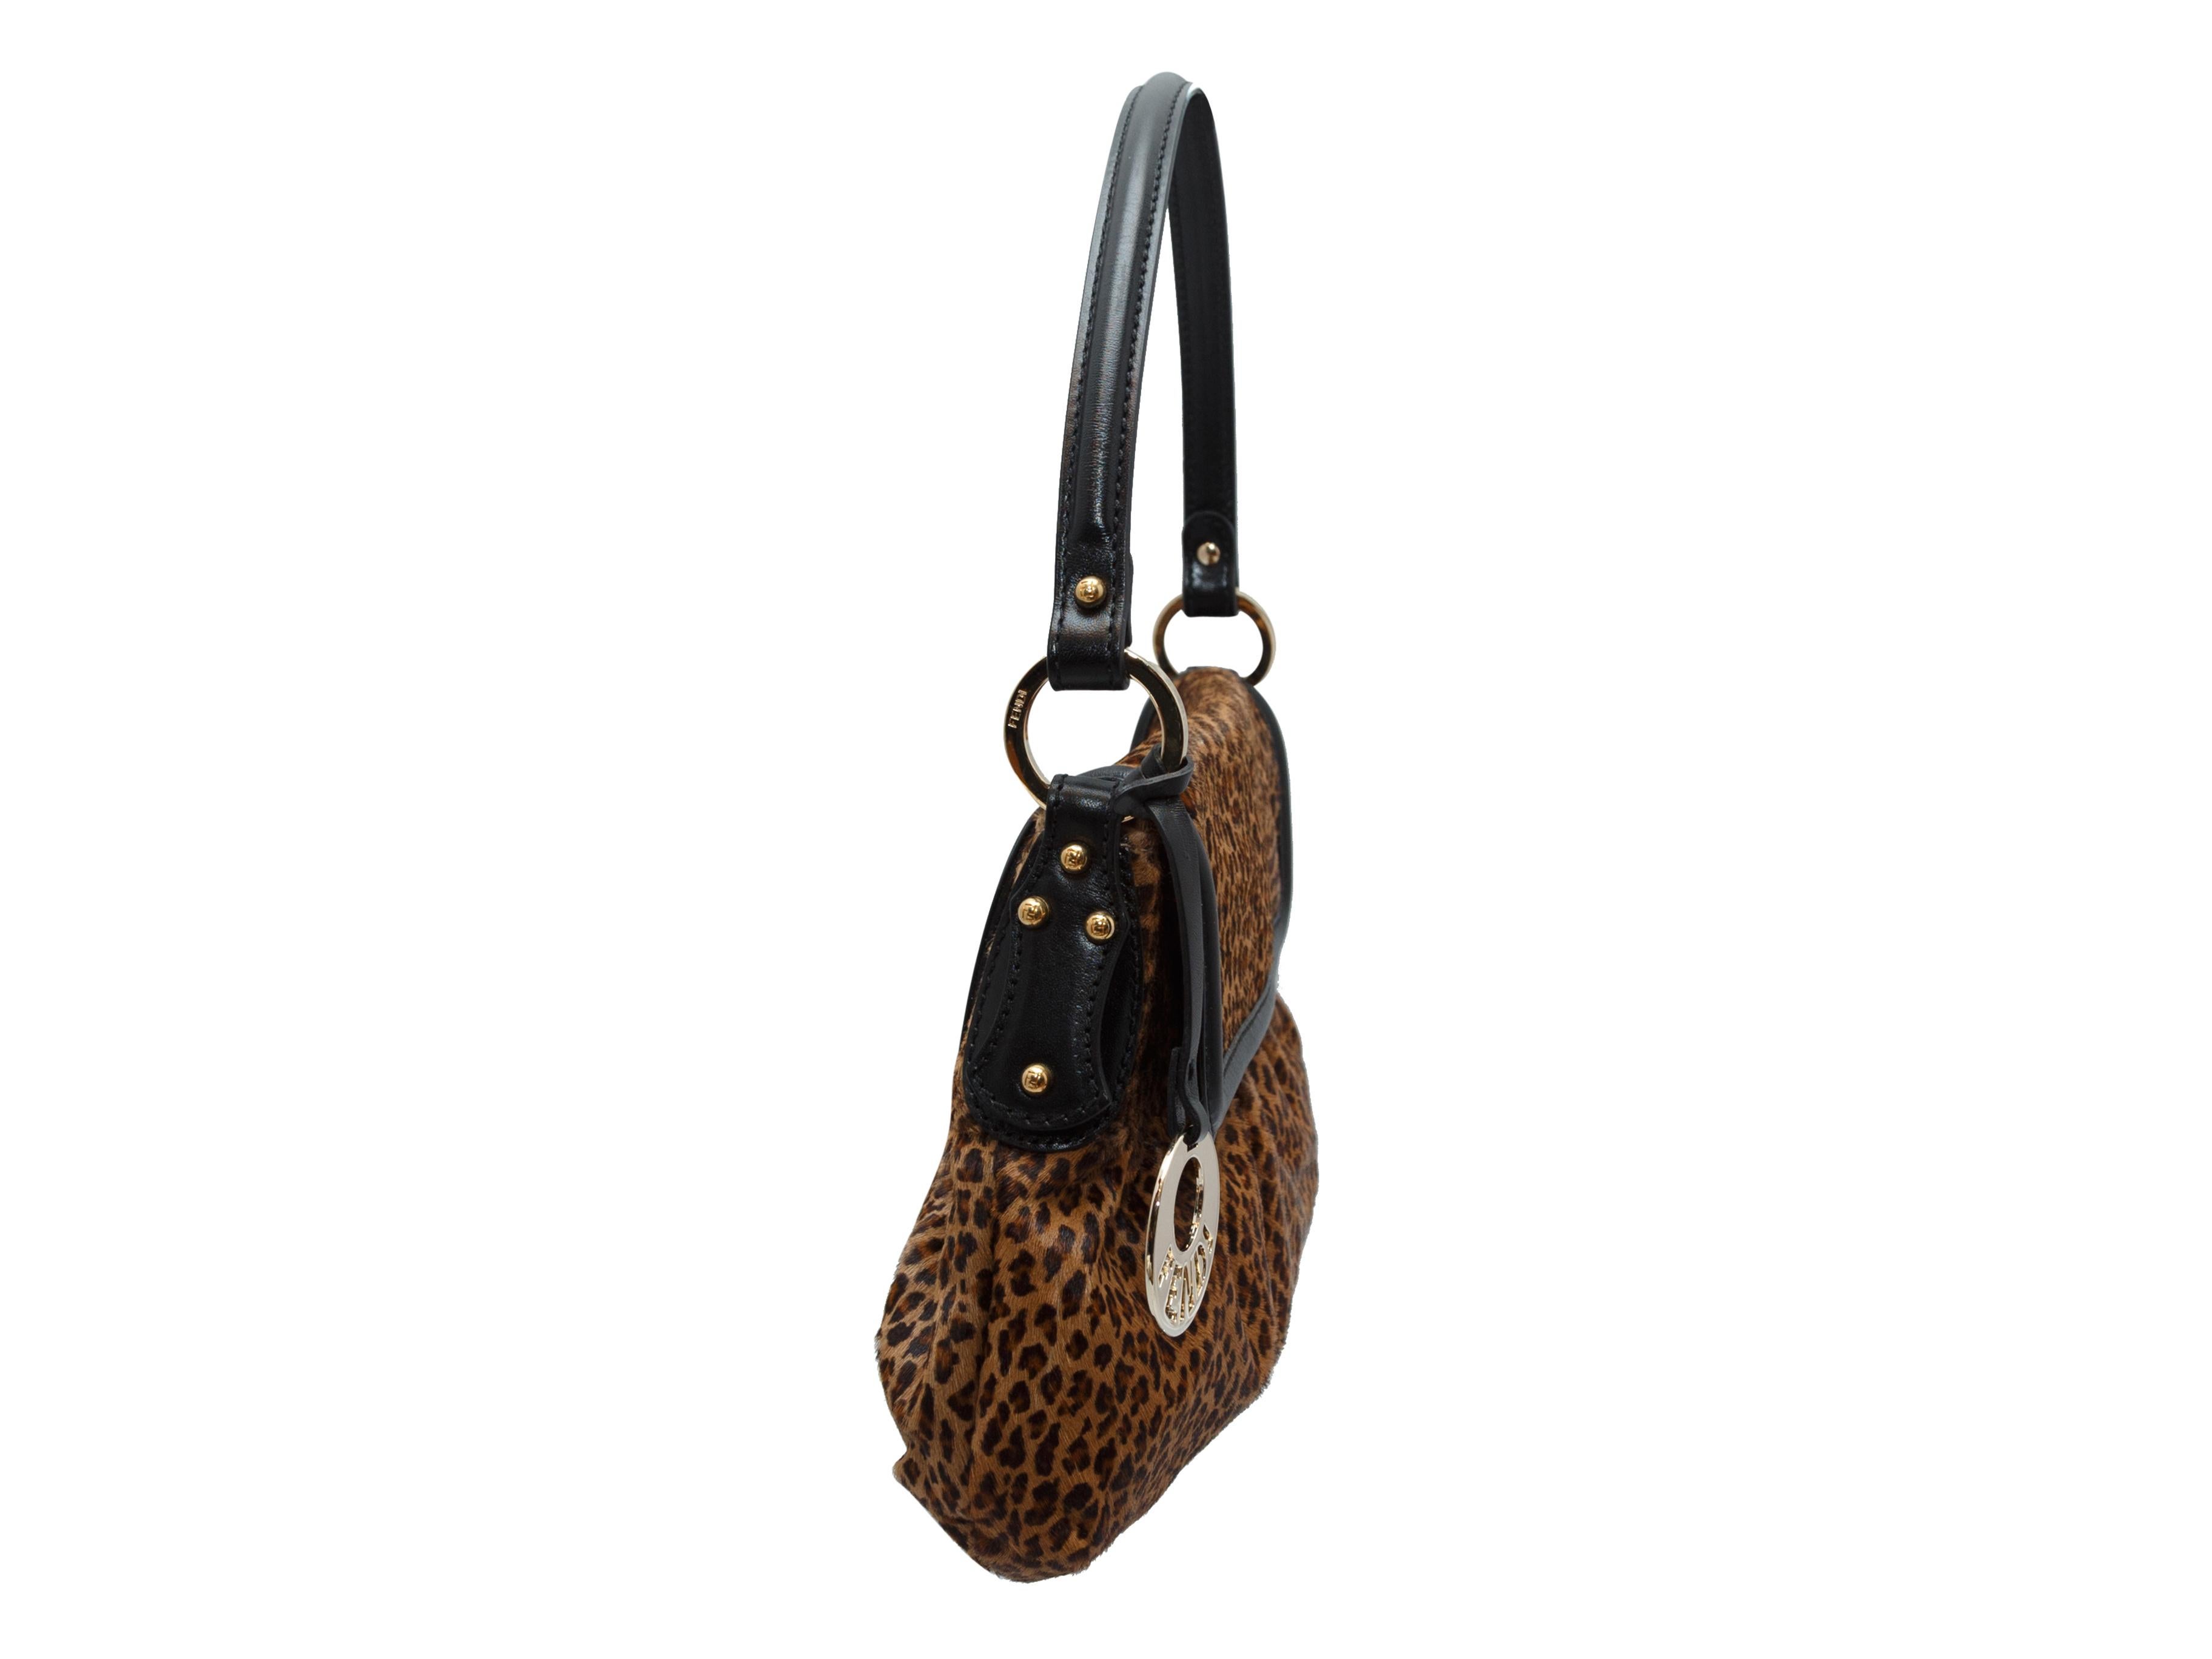 Product details: Brown and black Borsa Chef ponyhair shoulder bag by Fendi. Leopard print and leather trim throughout. Flap closure at front. 13